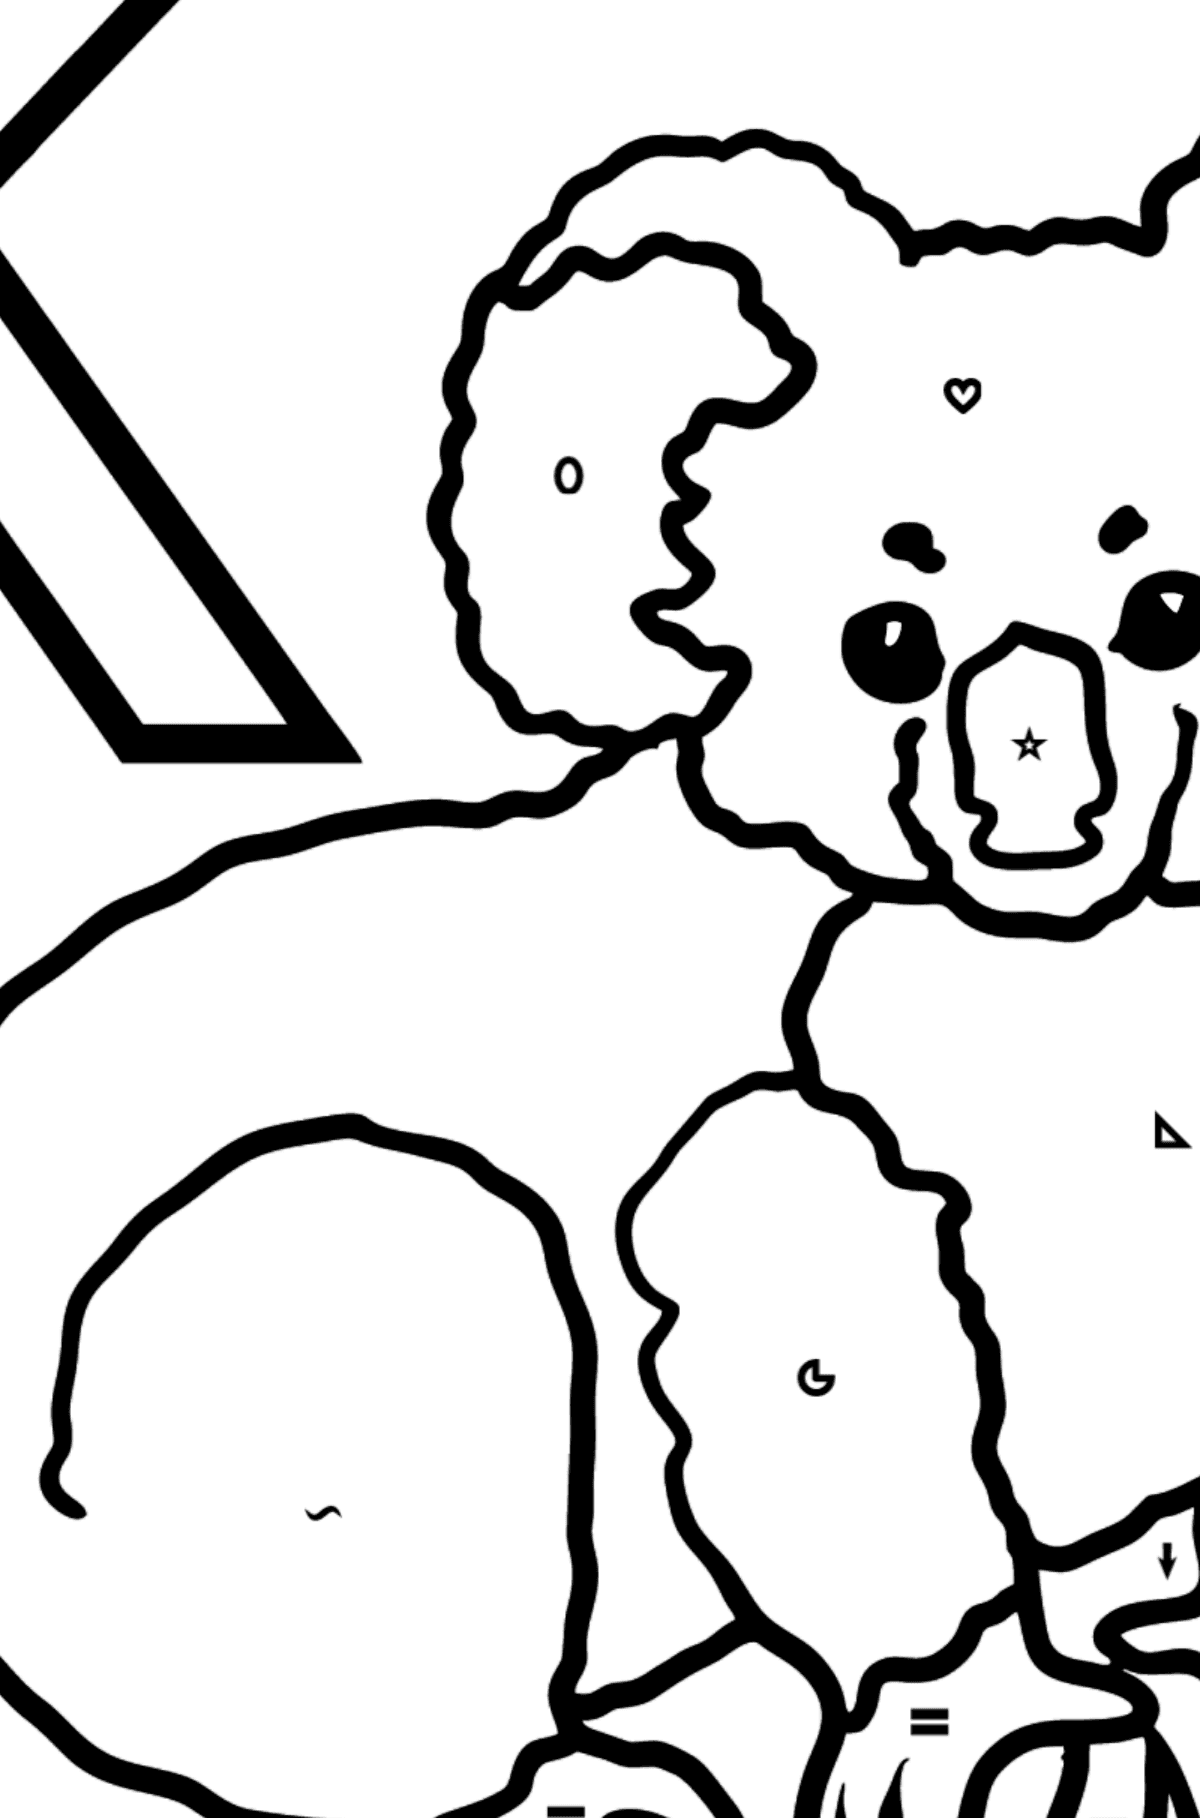 Spanish Letter K coloring pages - KOALA - Coloring by Symbols and Geometric Shapes for Kids